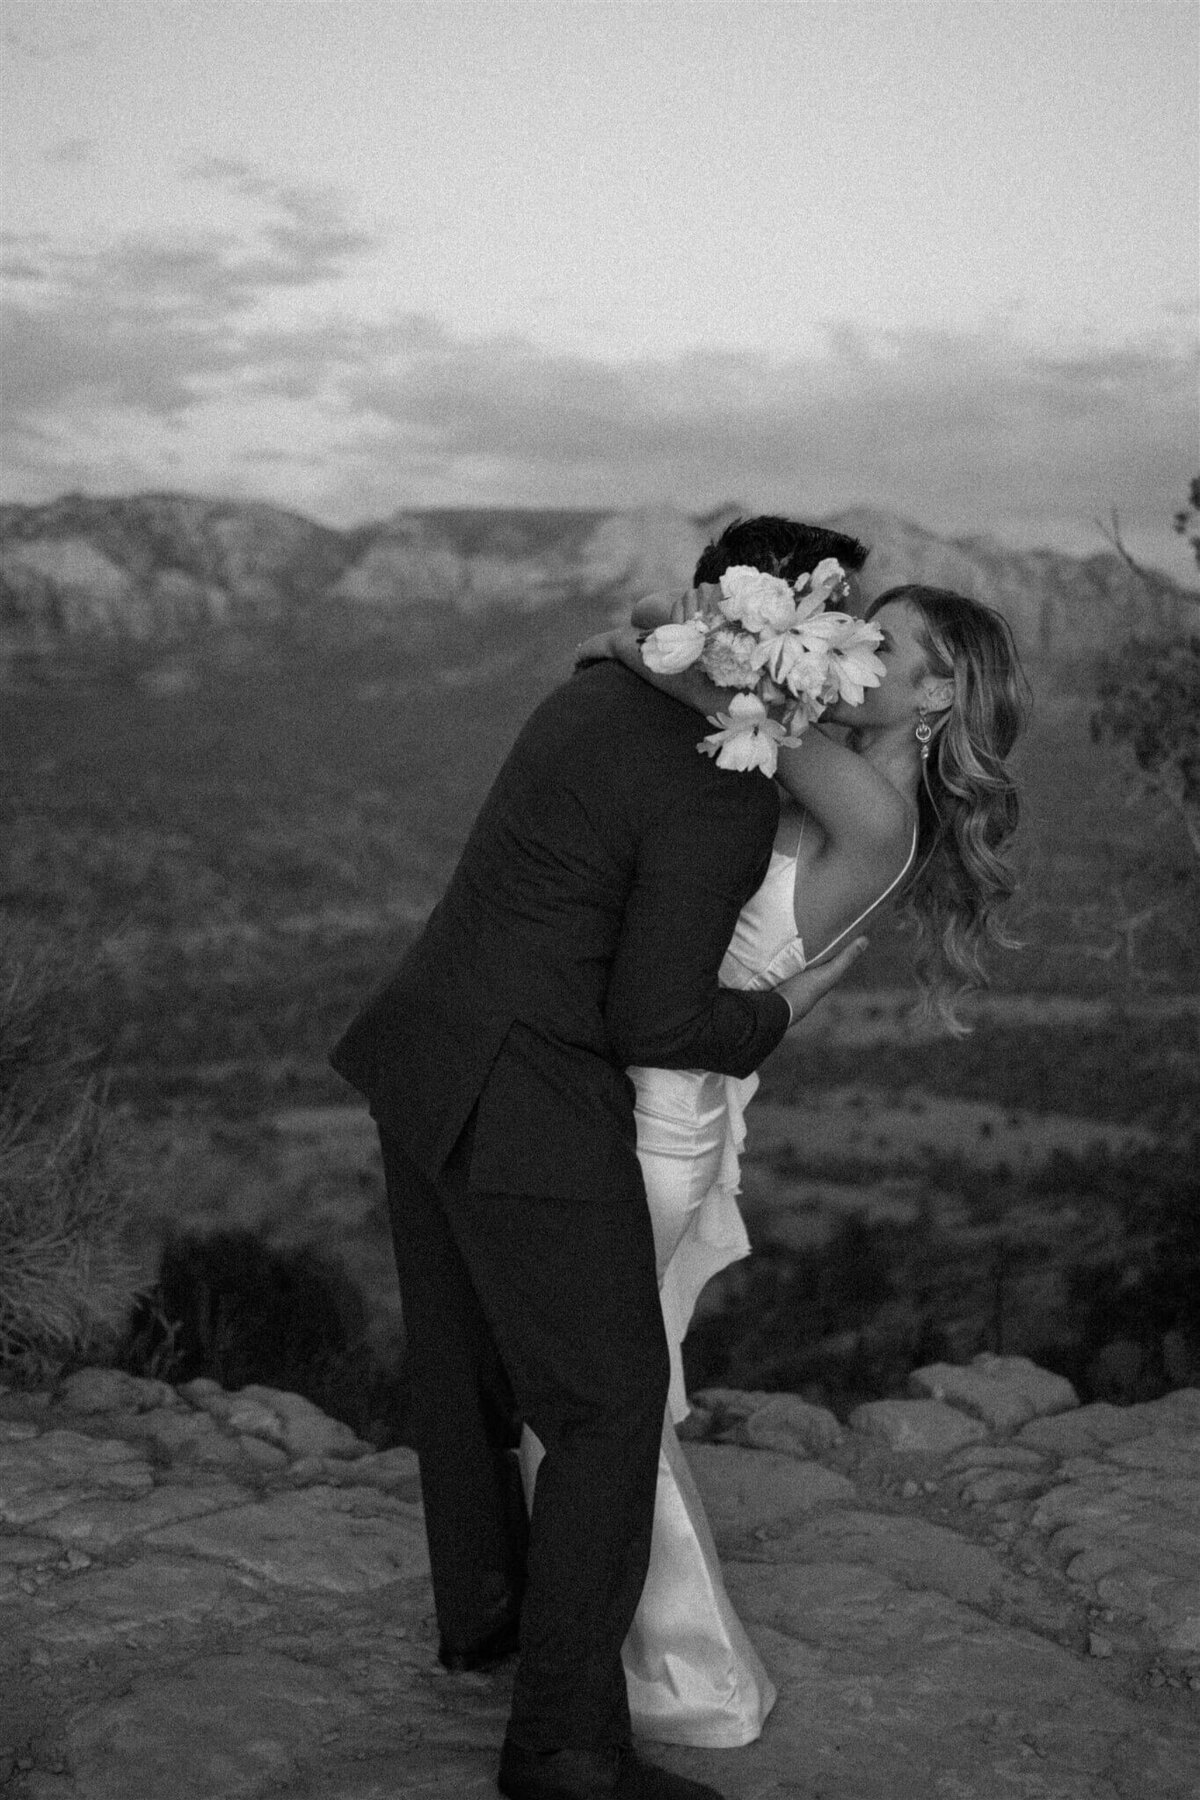 tinted-events-design-and-planning-sedona-wedding-black-and-white-photography-memories-by-lindsay-destination-wedding-planning-tintedevents.com